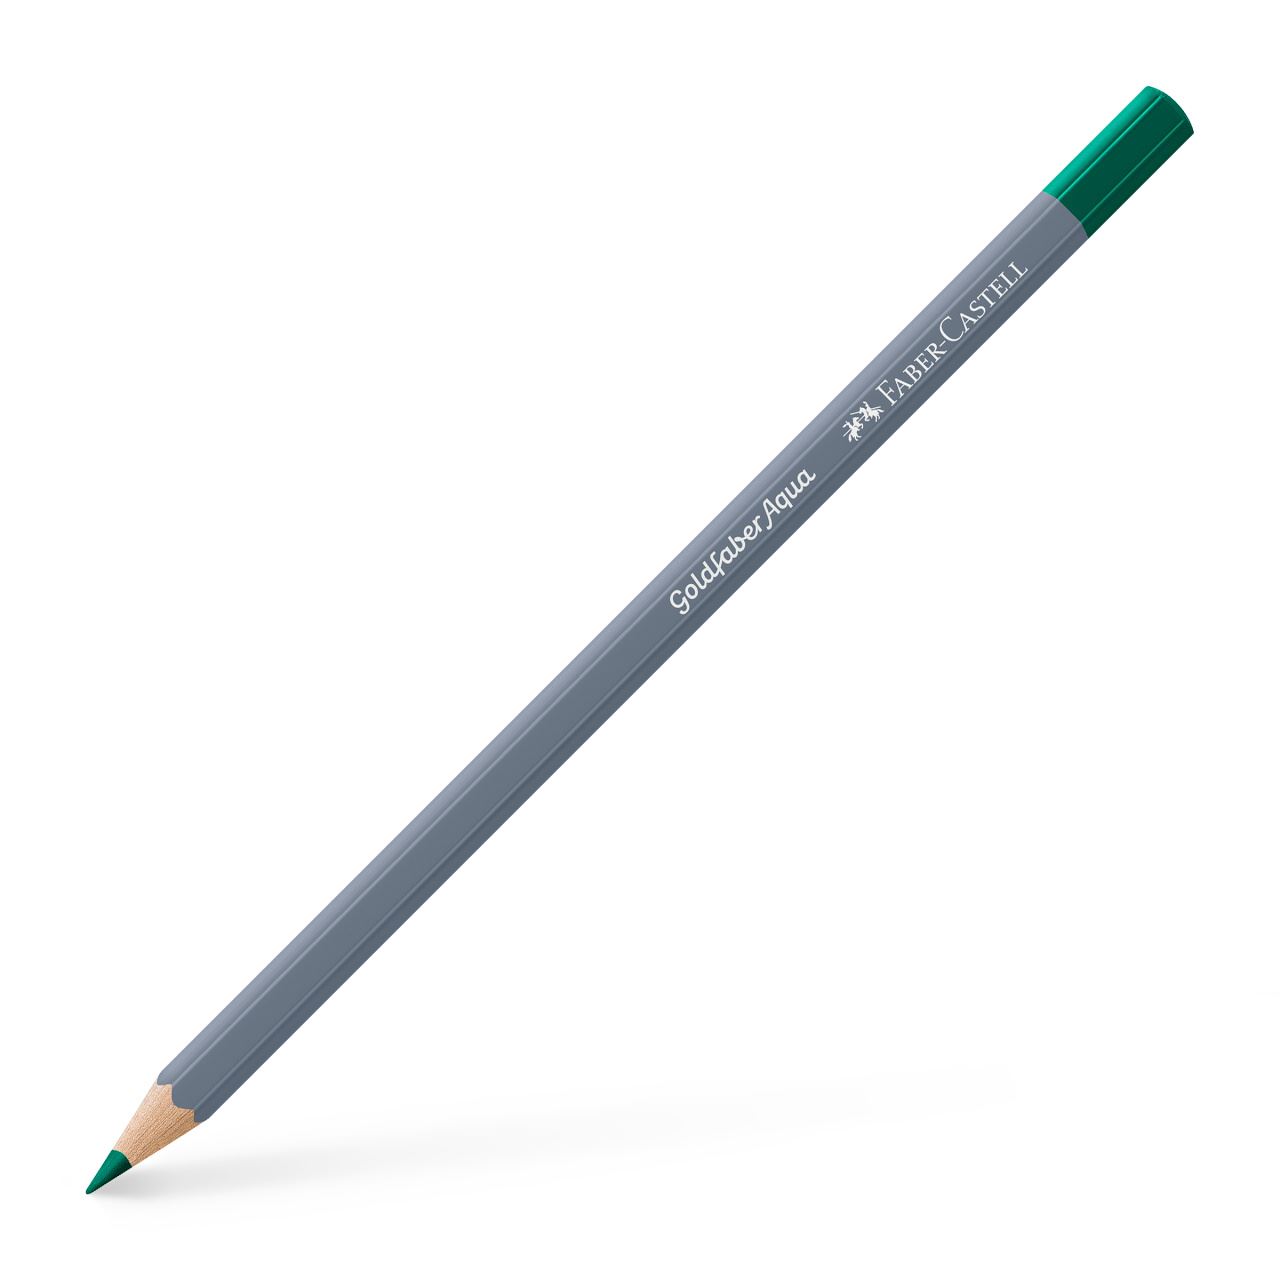 Faber-Castell - Goldfaber Aqua watercolour pencil, phthalo green